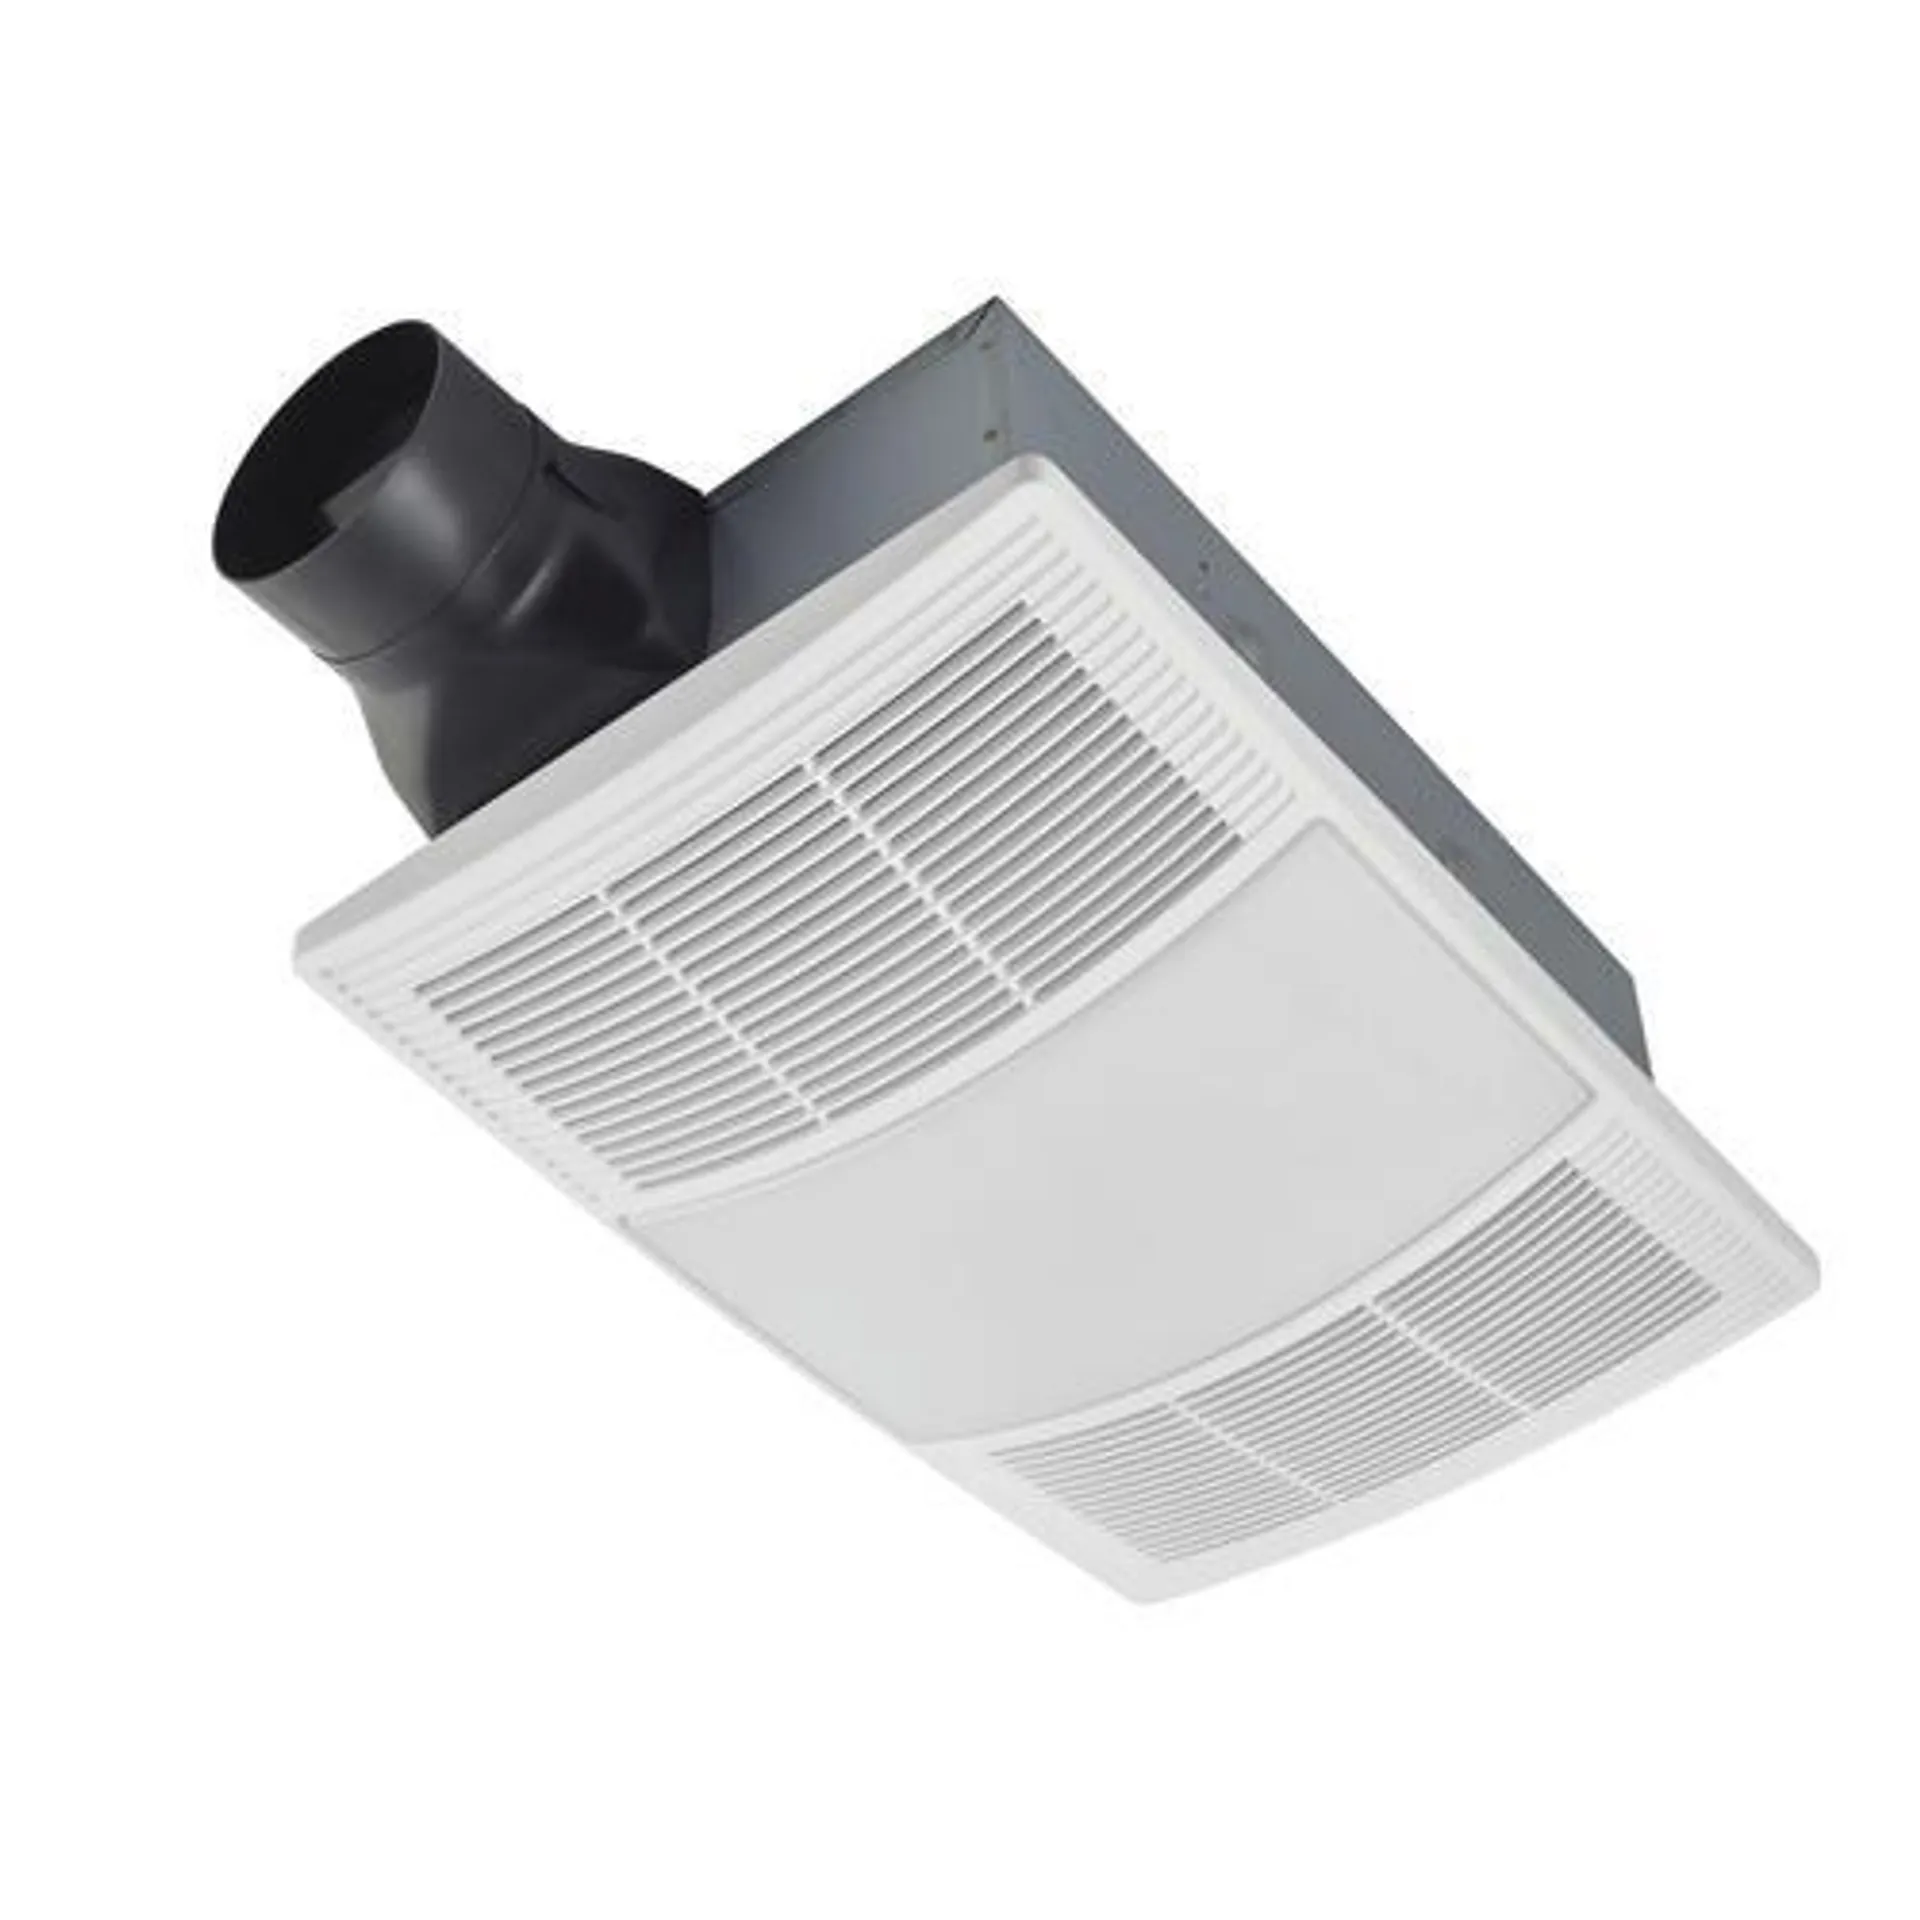 Broan® PowerHeat™ 110 CFM Ceiling Bathroom Exhaust Fan with Heater and LED Light